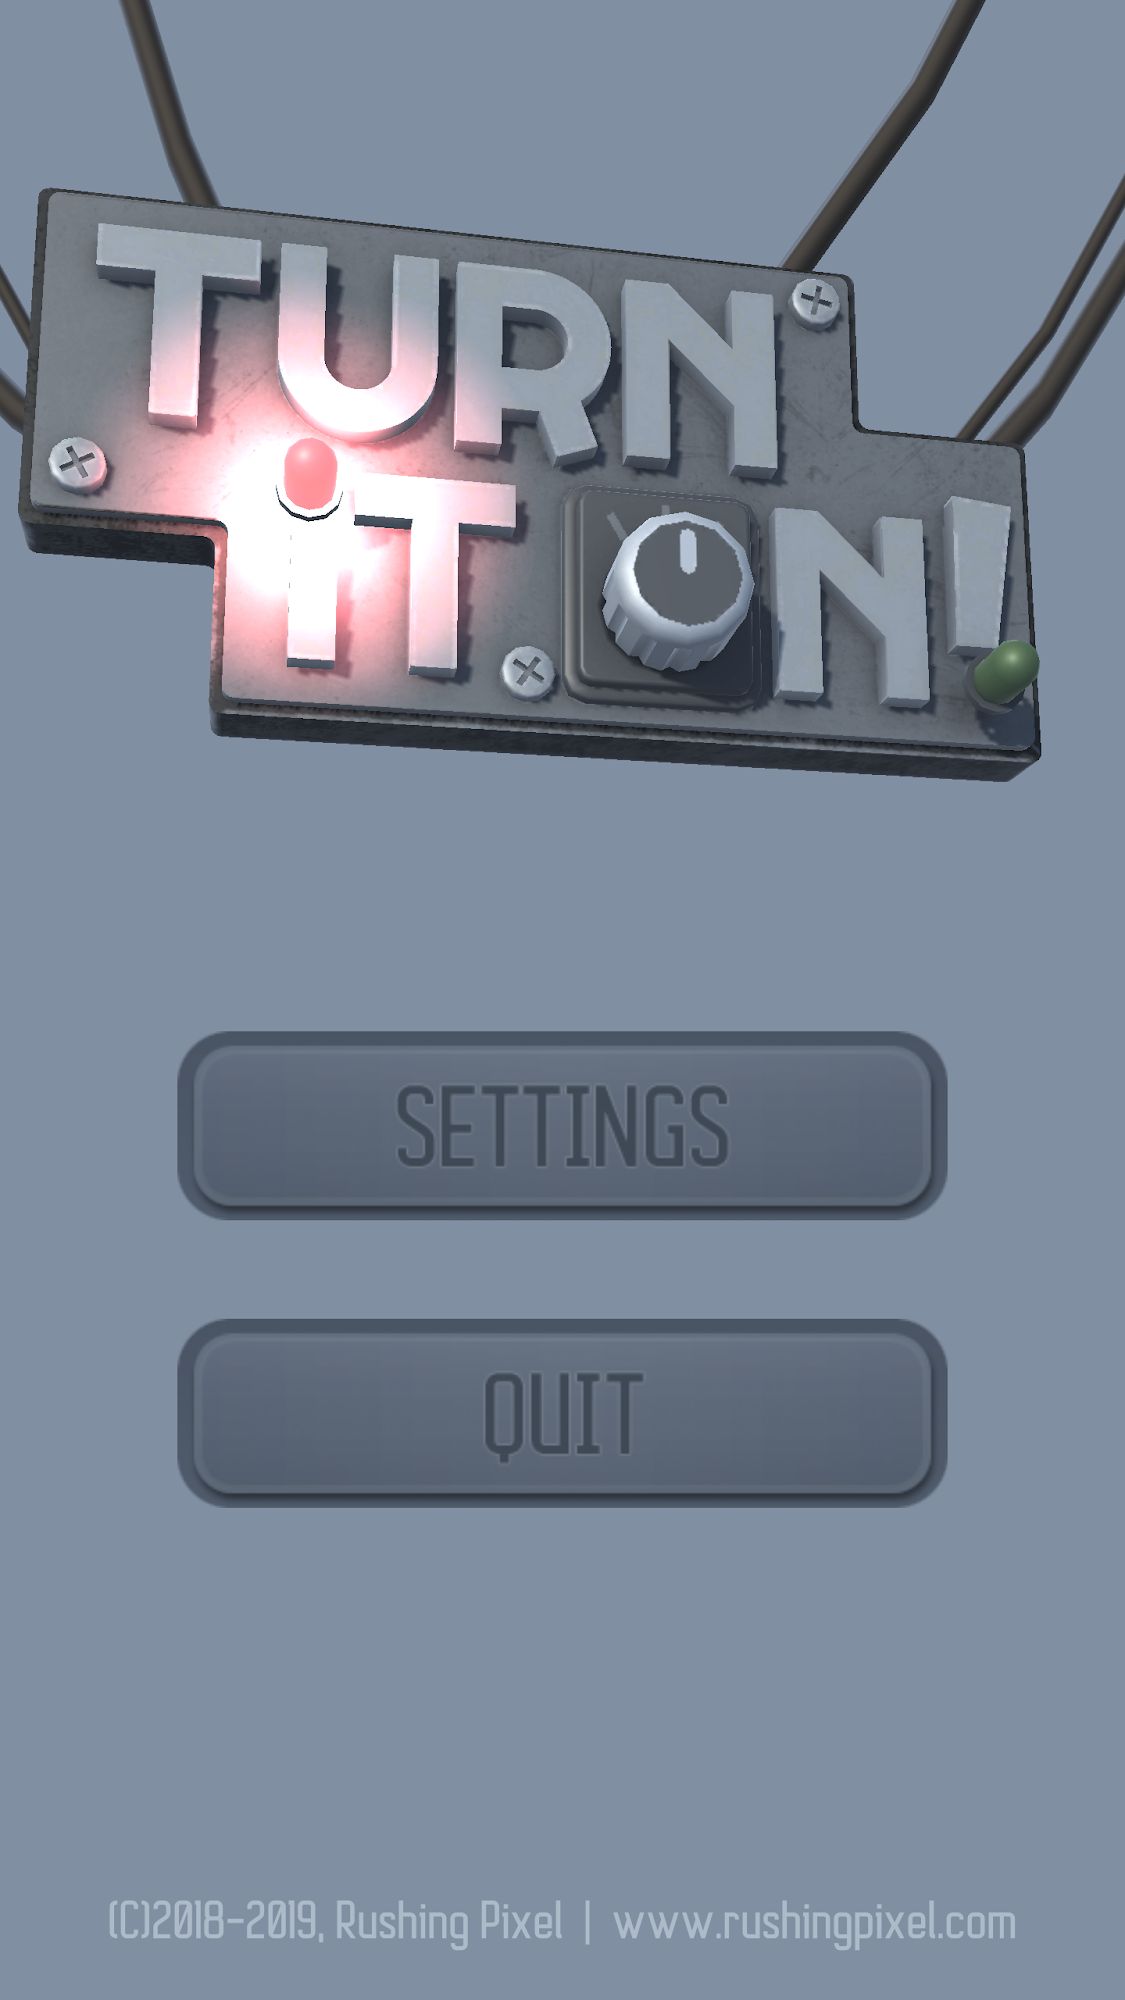 Turn It On! for Android